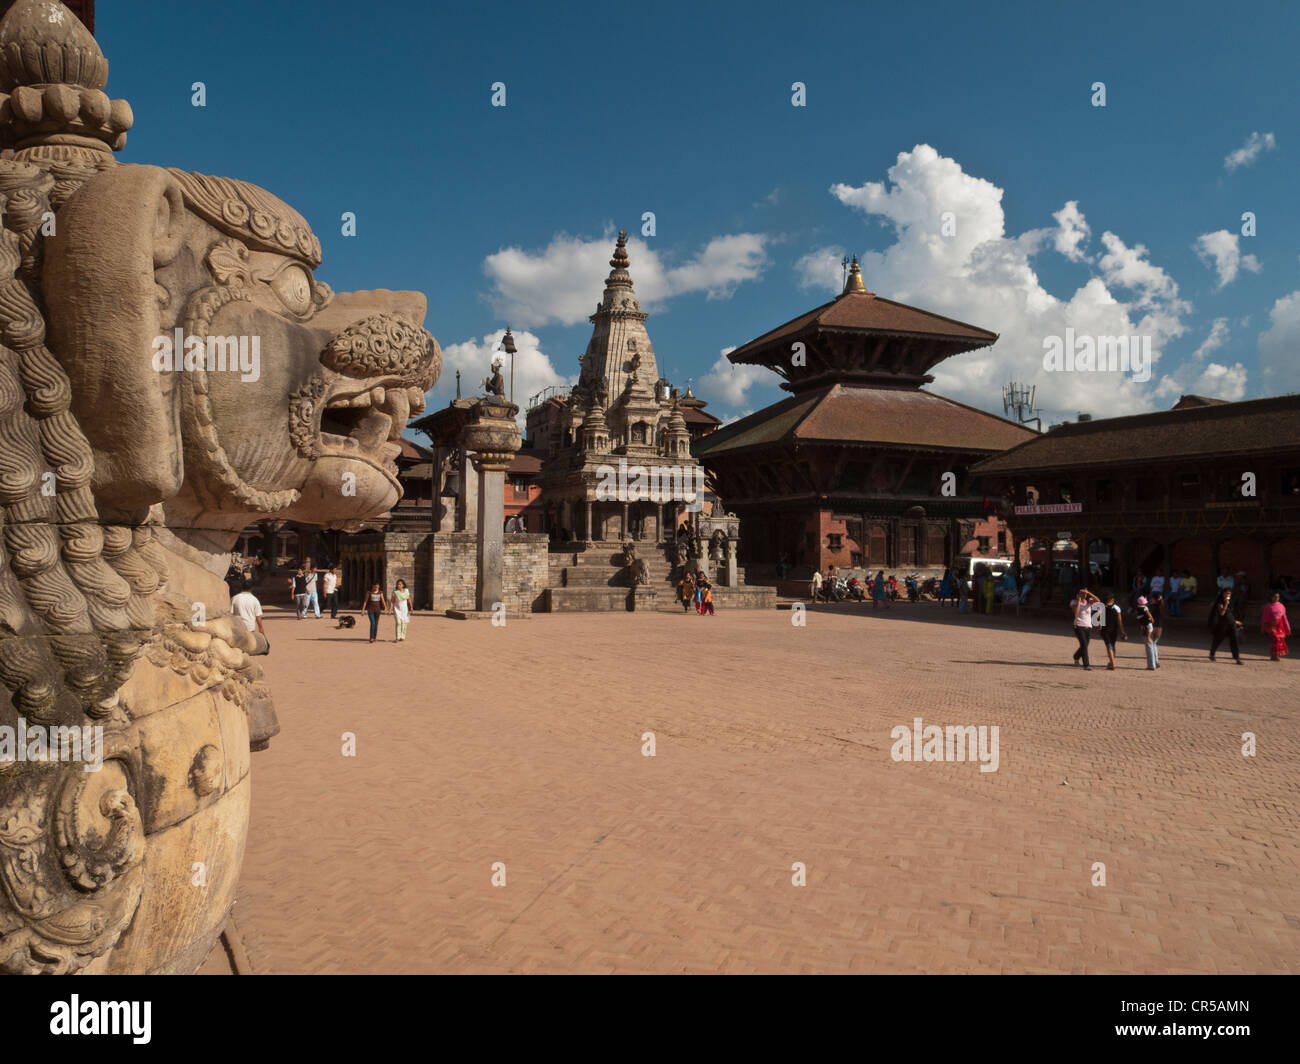 Durbar Square, the main square in the historical town of Bhaktapur, Kathmandu, Nepal, South Asia Stock Photo